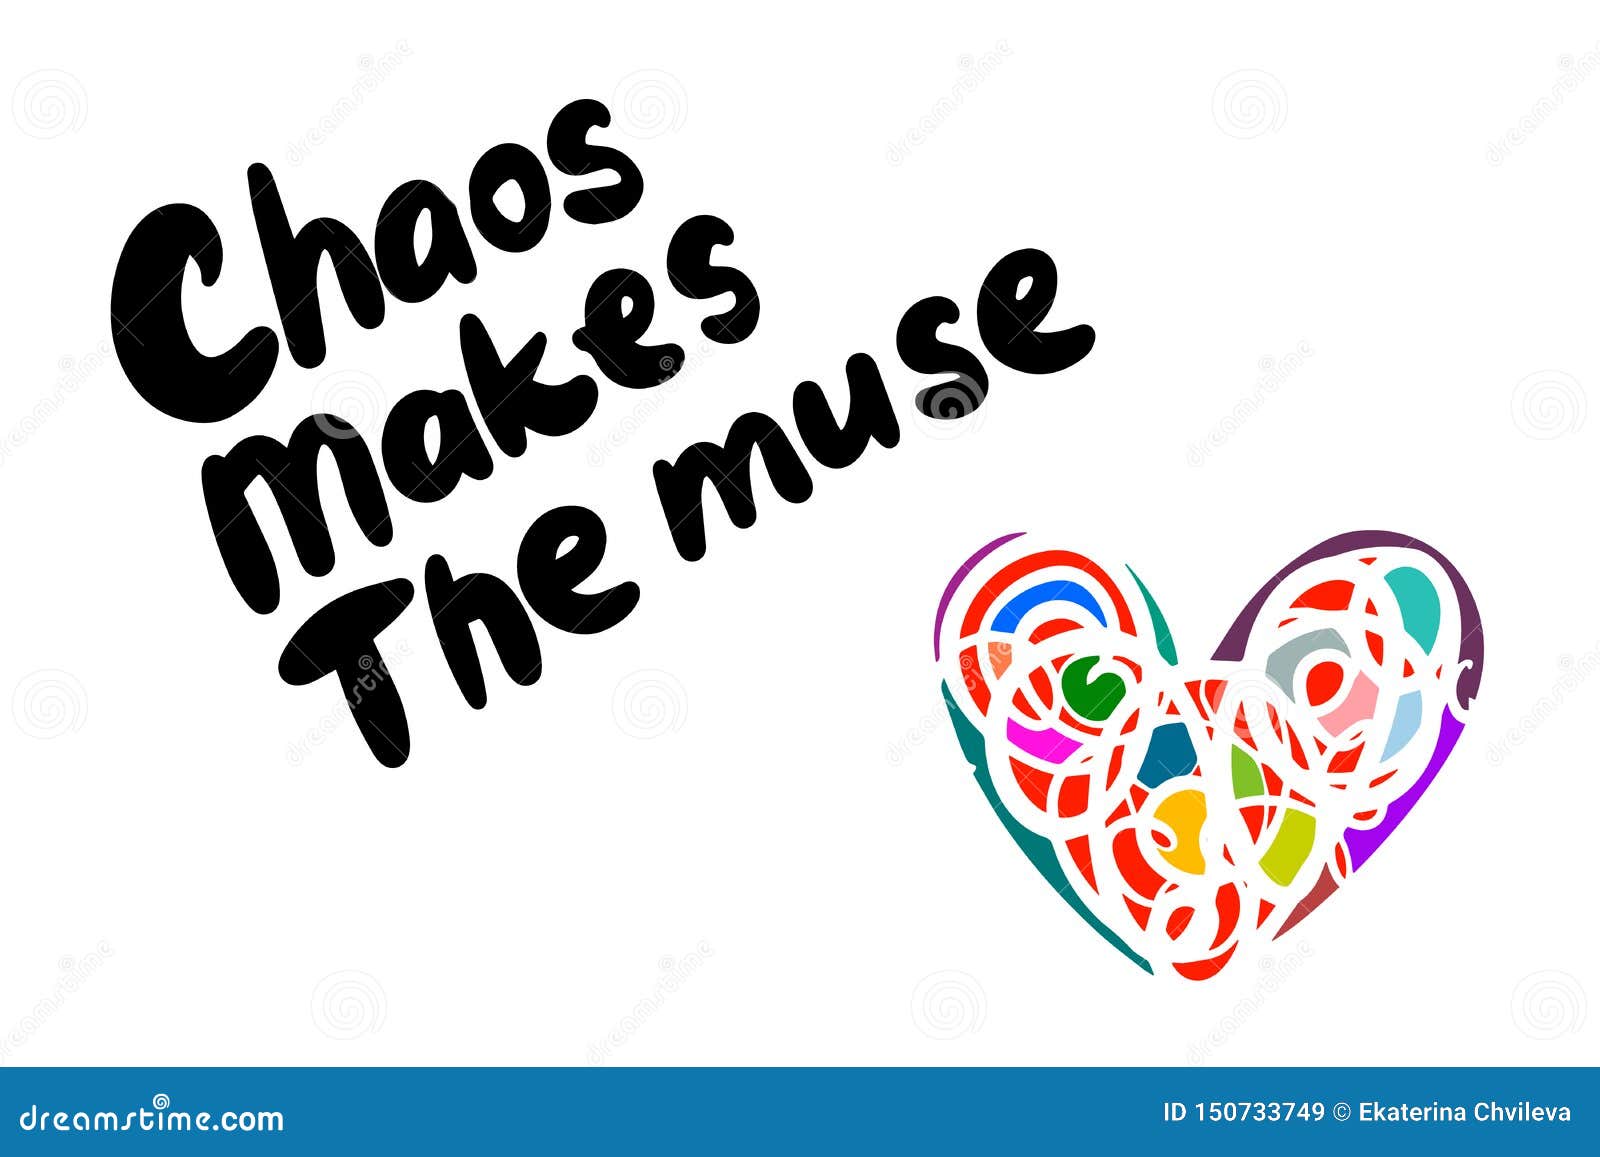 Muse the chaos makes Going Nowhere